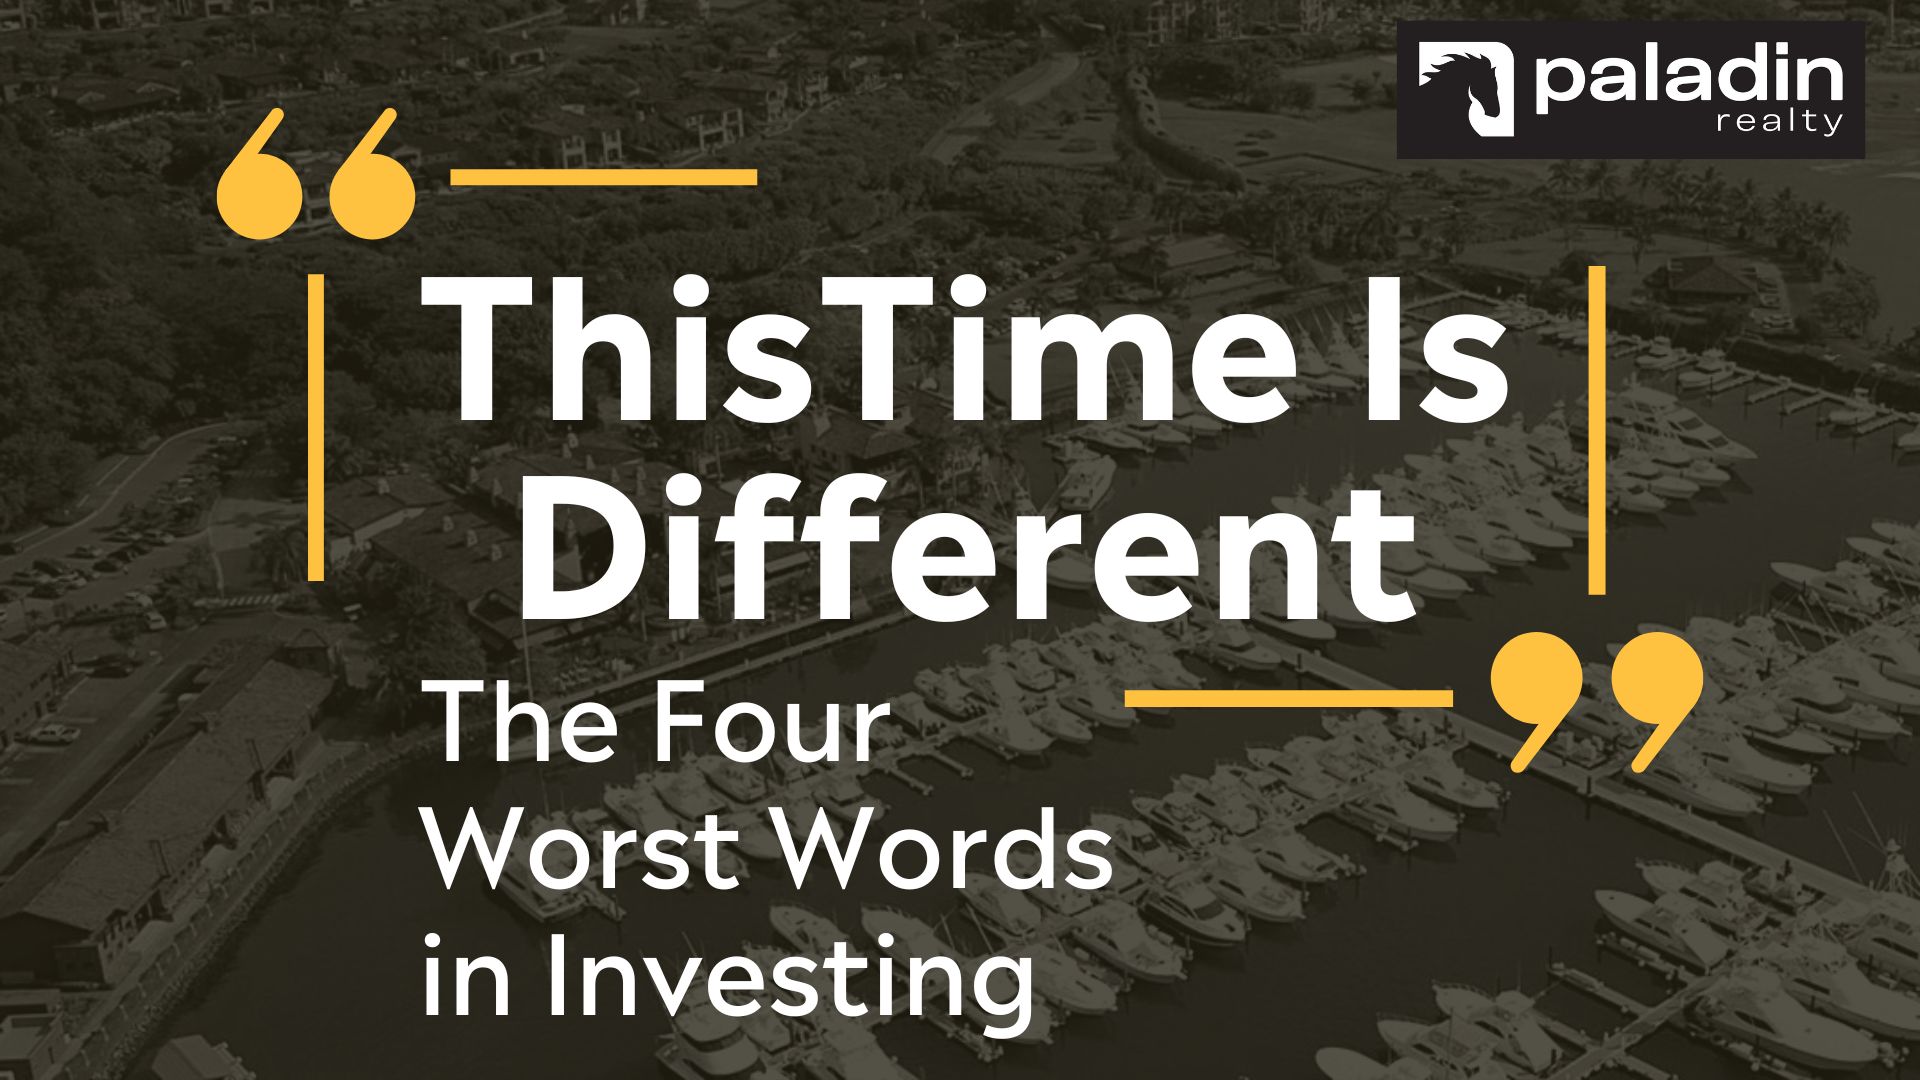 6b [Web] - FI - This Time is Different - the Four Worst Words in Investing